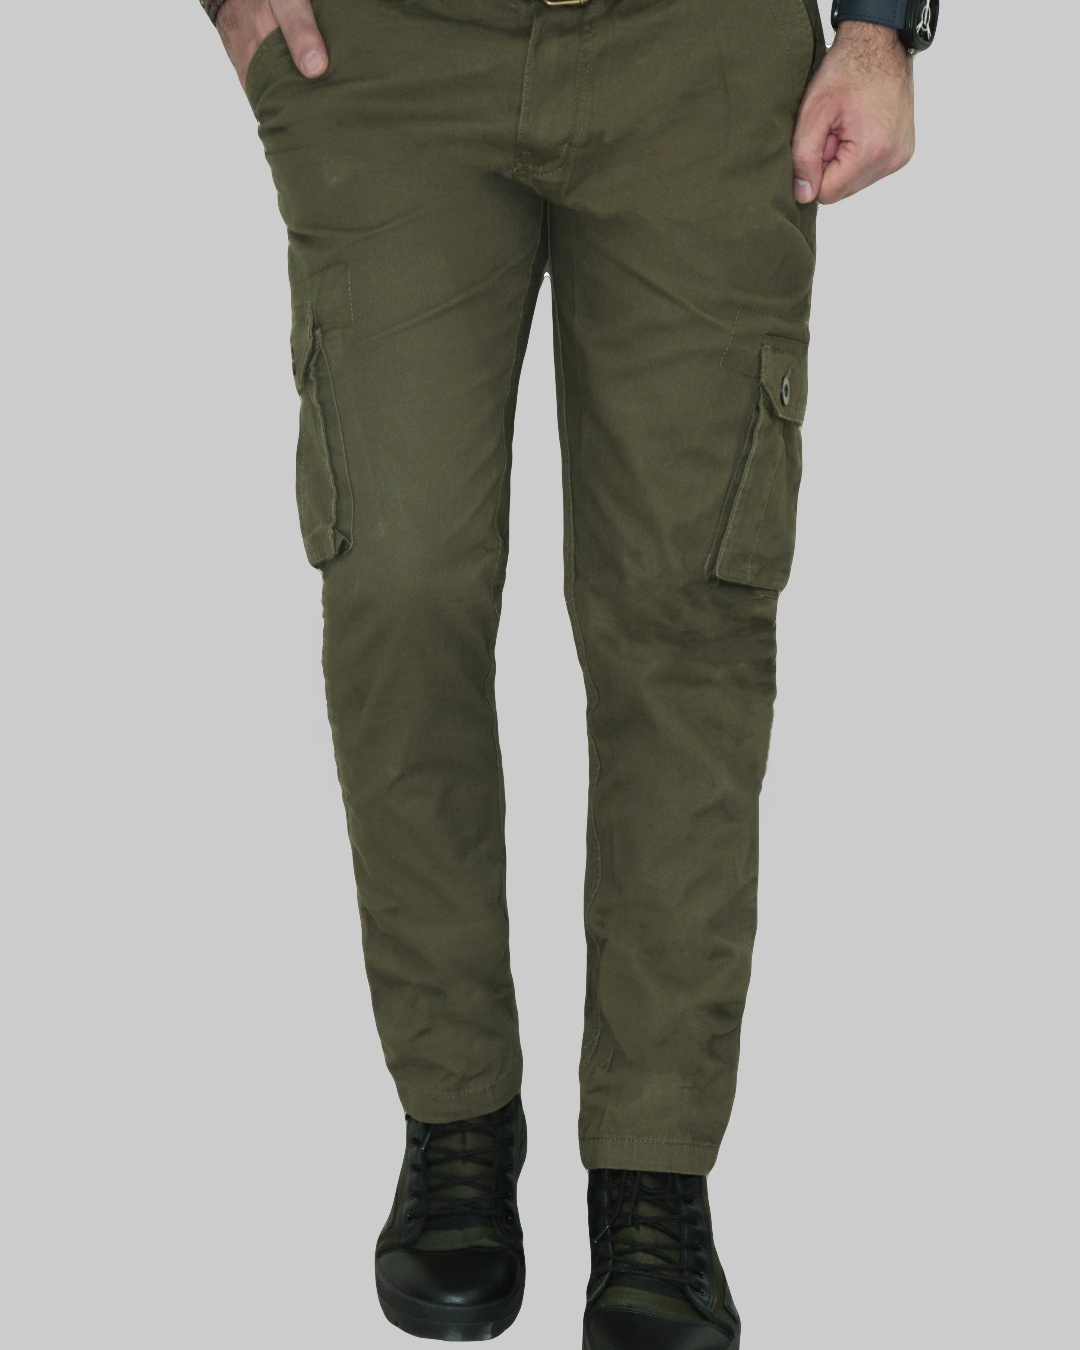 4443 Green Cargo Pants Stock Photos HighRes Pictures and Images  Getty  Images